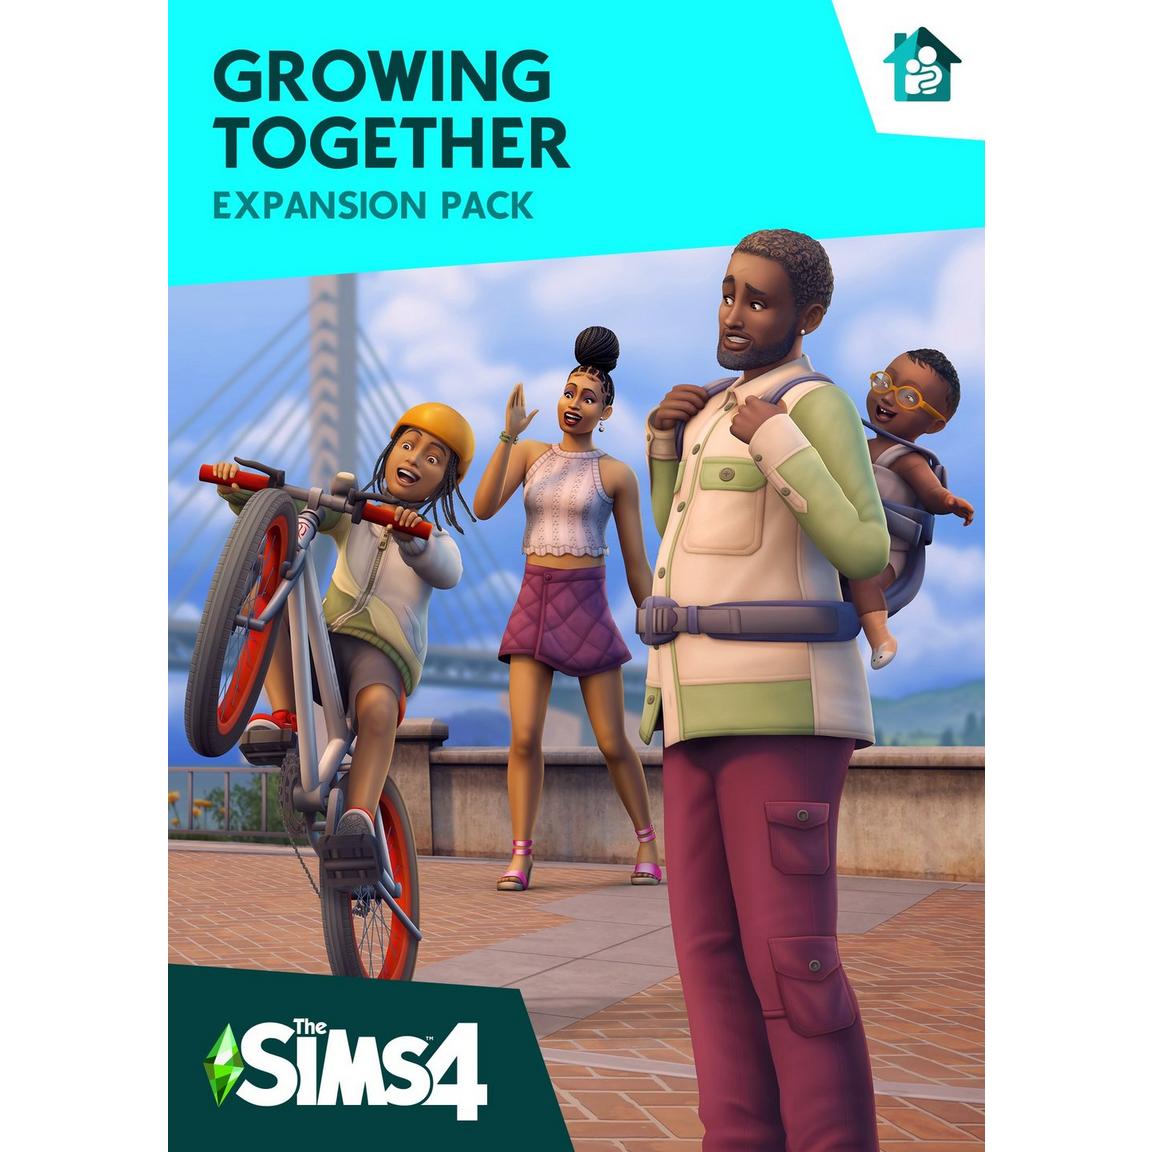 Electronic Arts The Sims 4 Growing Together Expansion Pack DLC - PC EA app